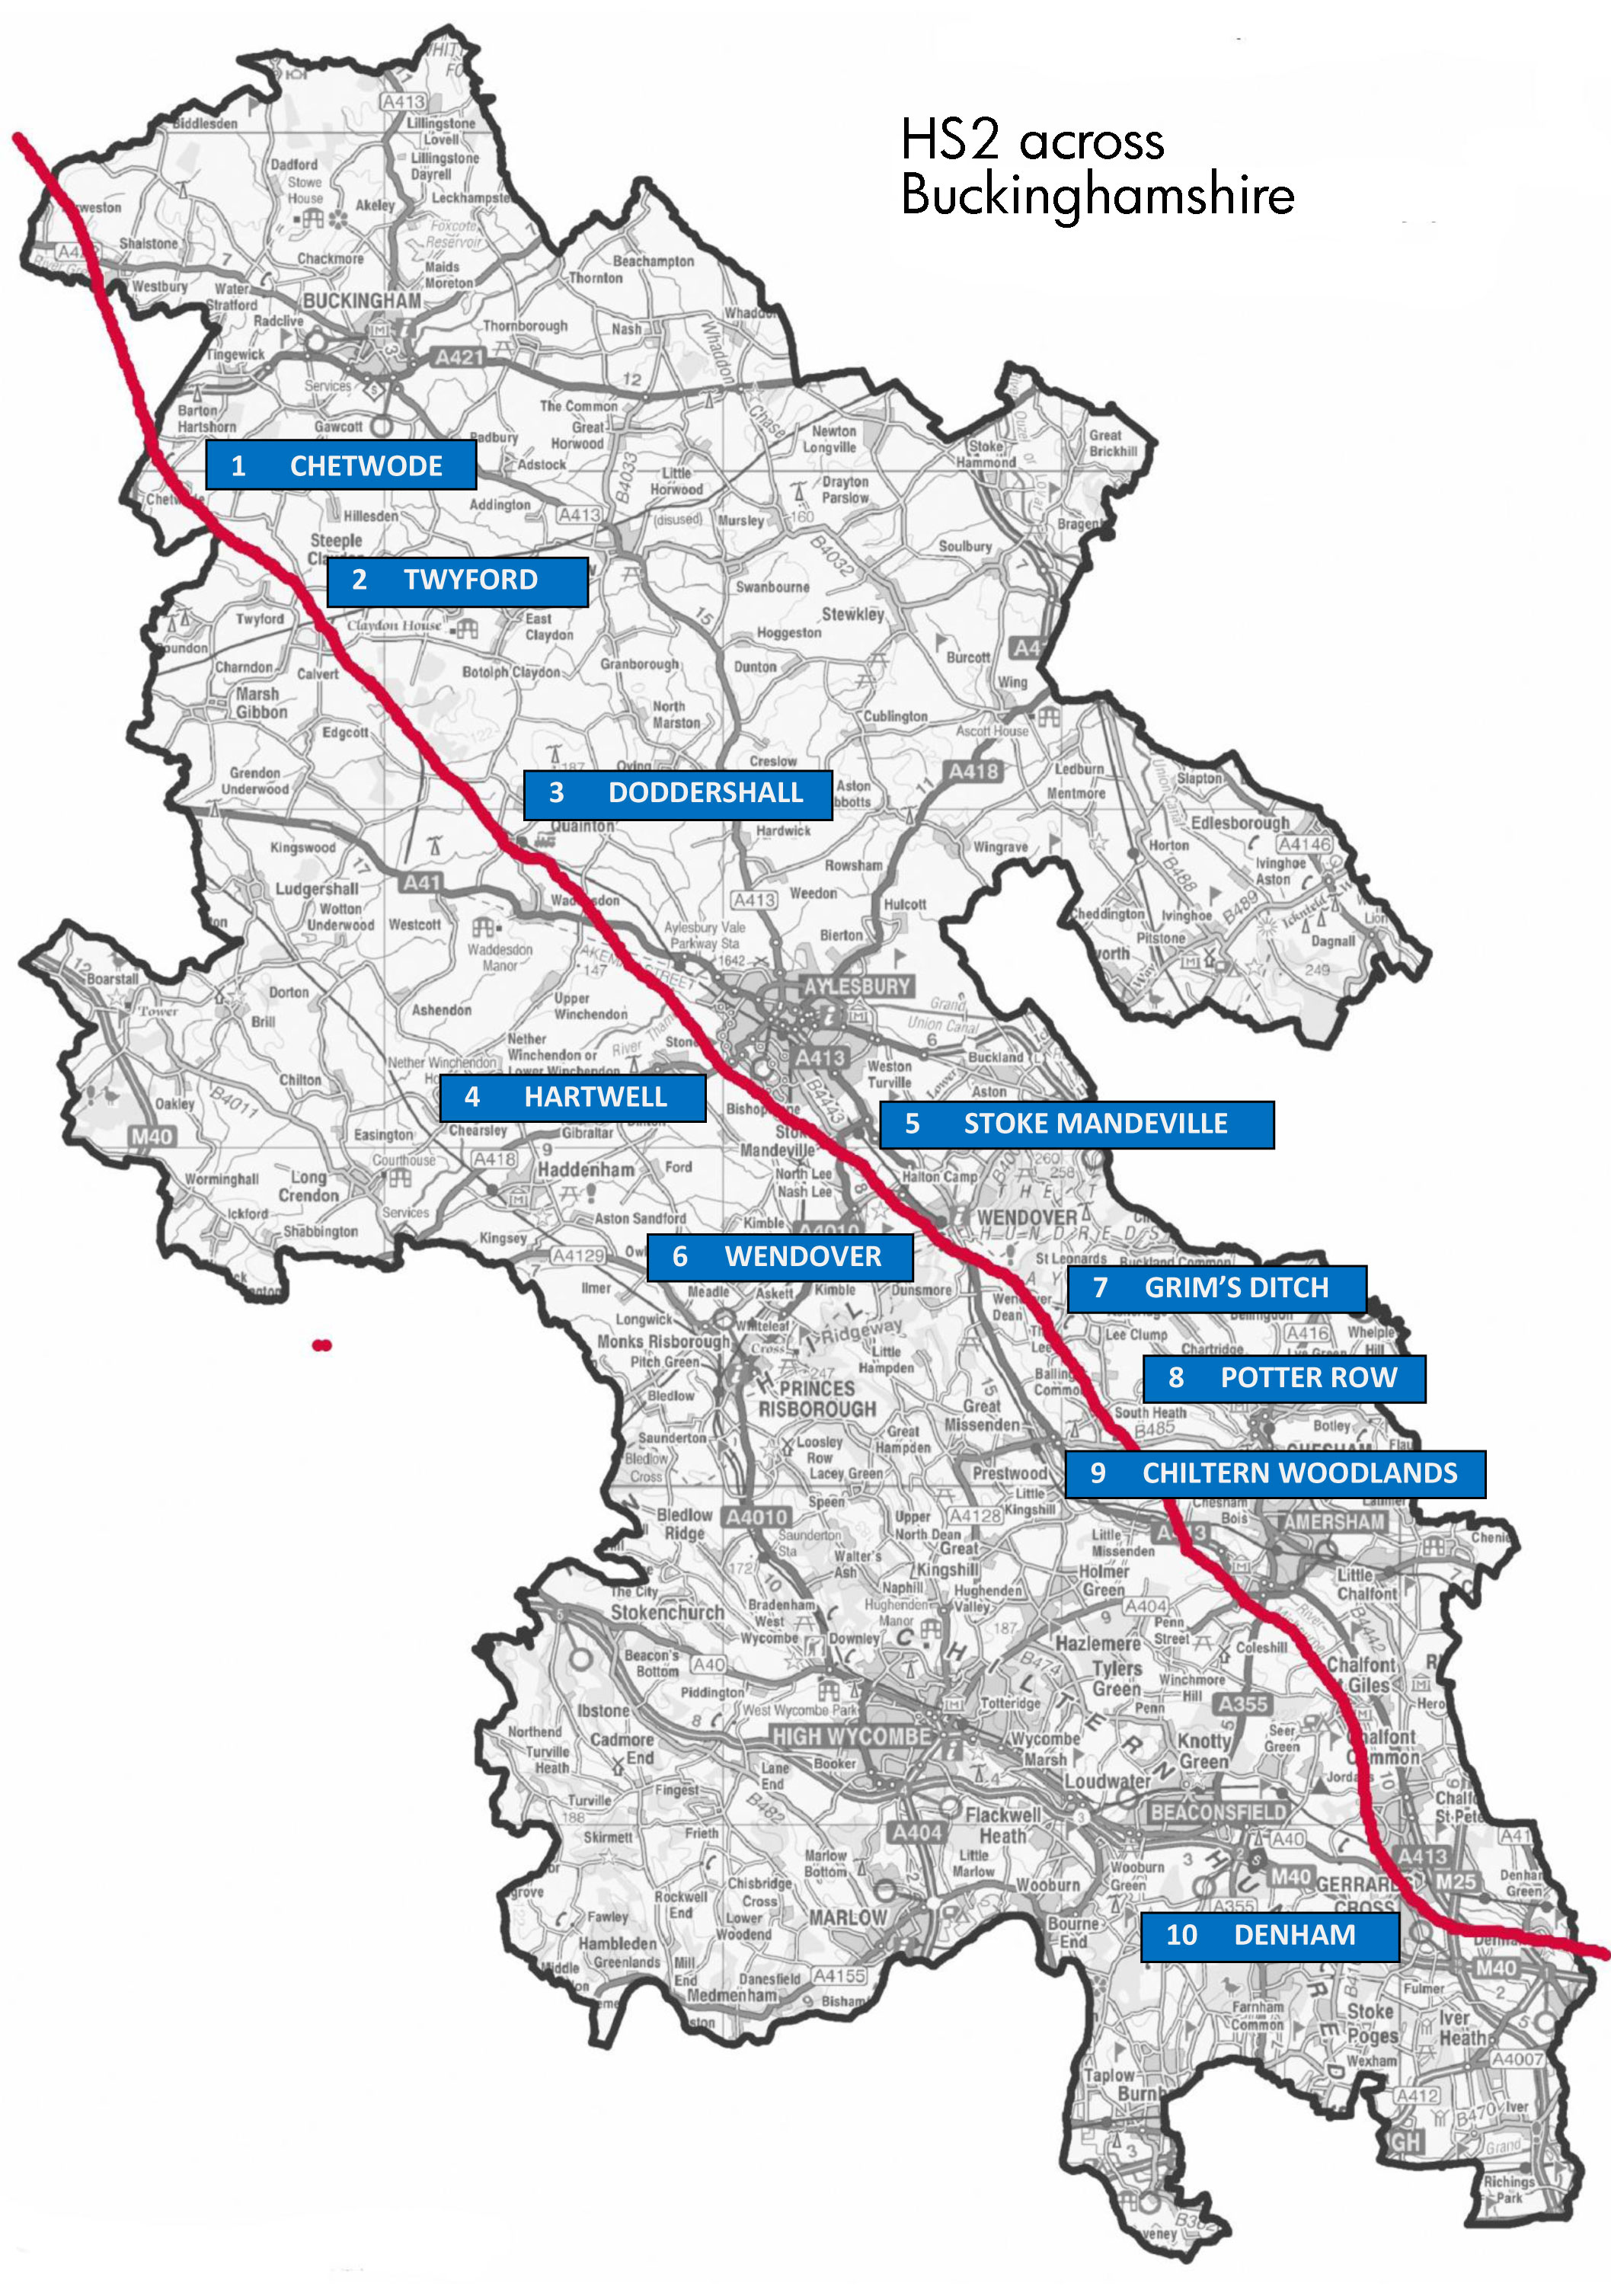 The route of HS2 across Buckinghamshire